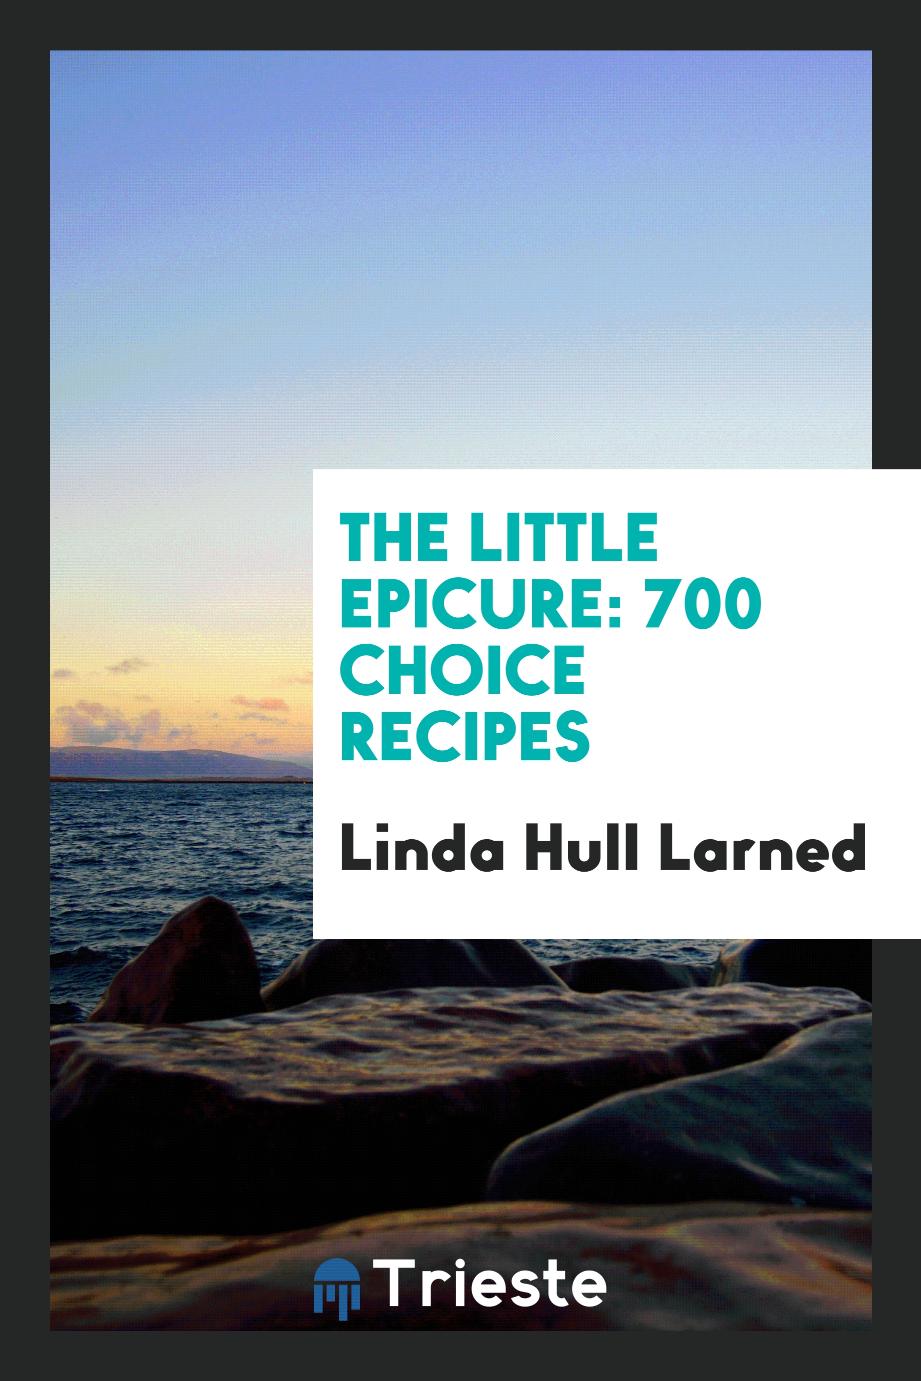 The Little Epicure: 700 Choice Recipes